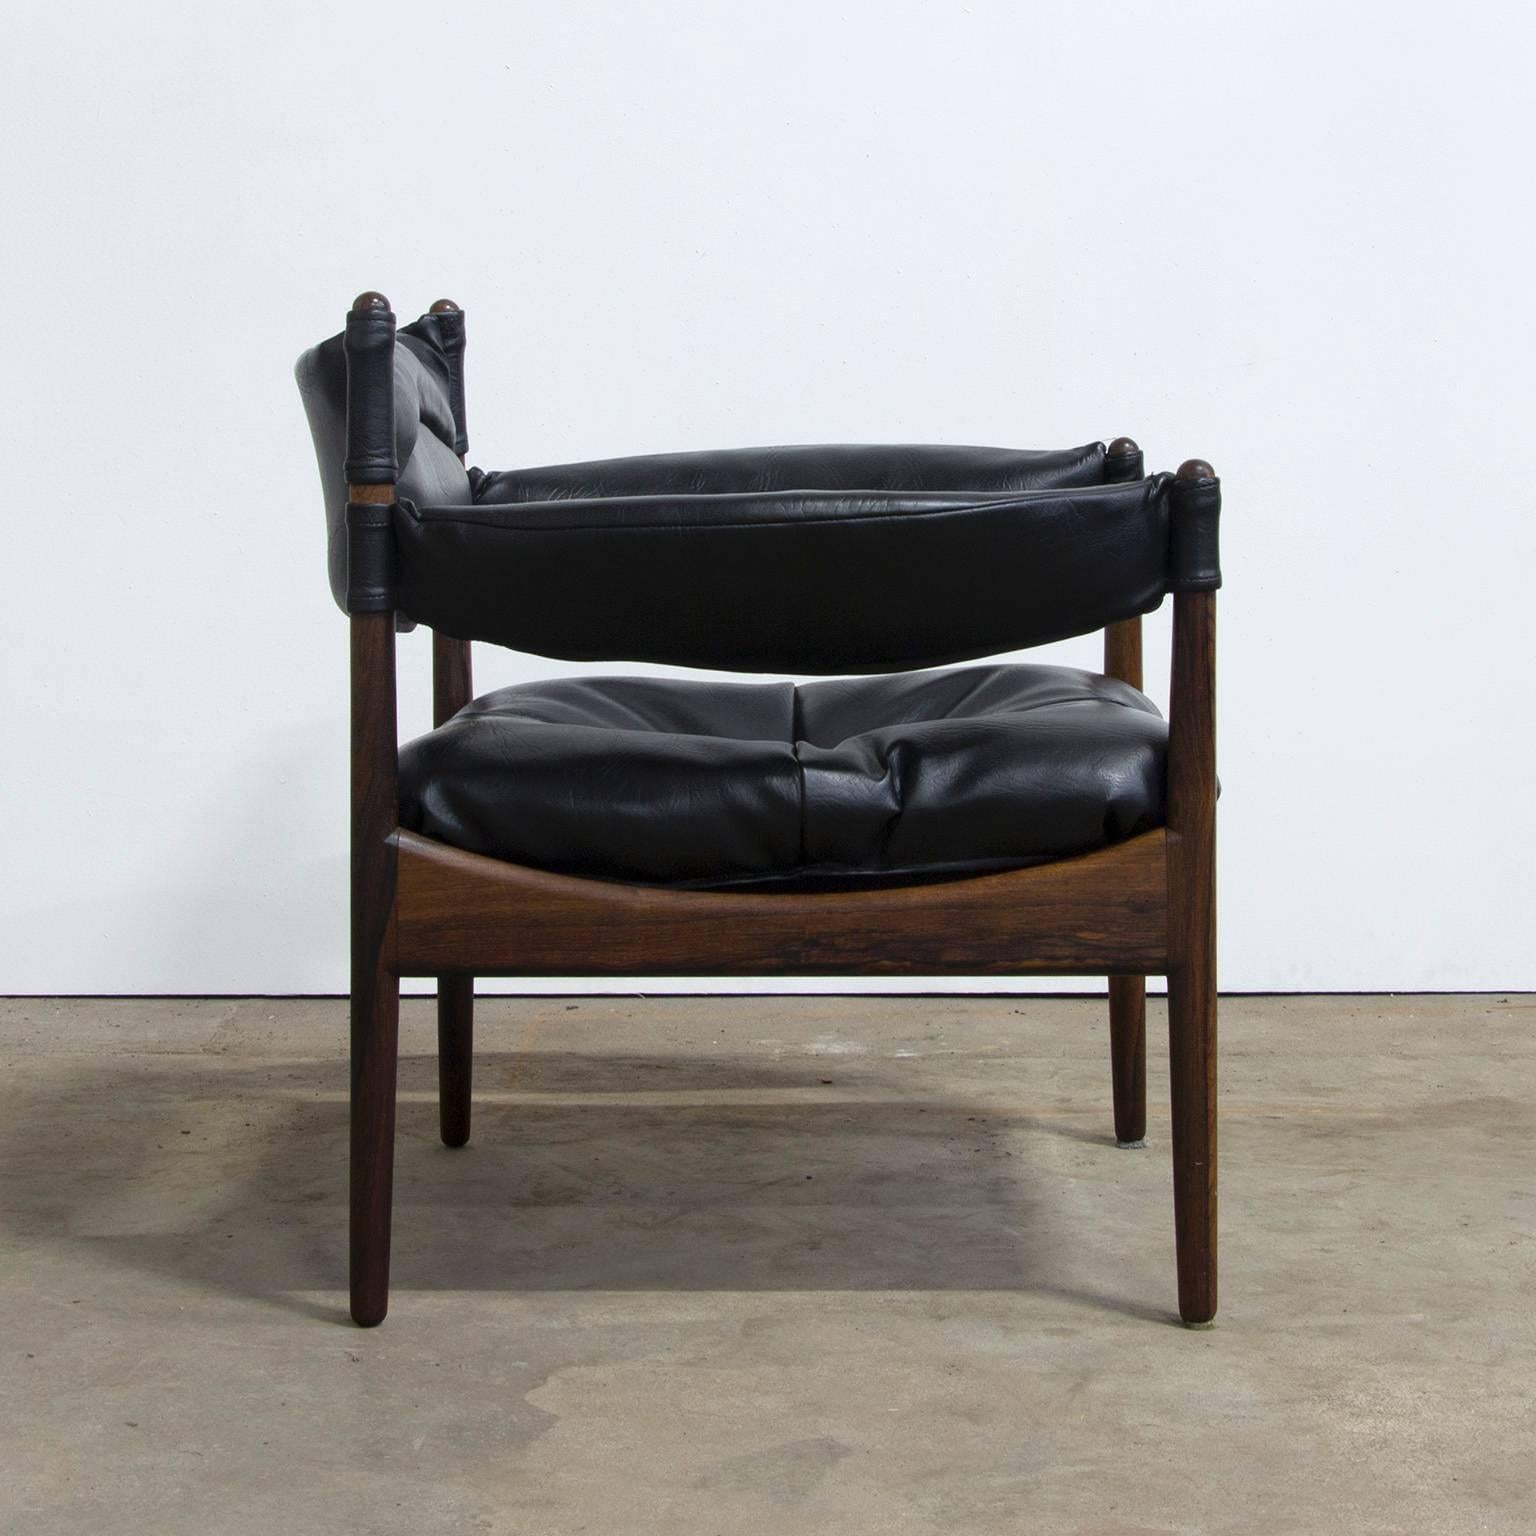 Modus easychair in solid palissander and rosewood. Designed in 1963 by Kristian Solmer Vedel. Manufactured by Søren Willadsen, Denmark. Upholstery in original black leather. Beautiful leather in perfect condition. Wooden base also in good